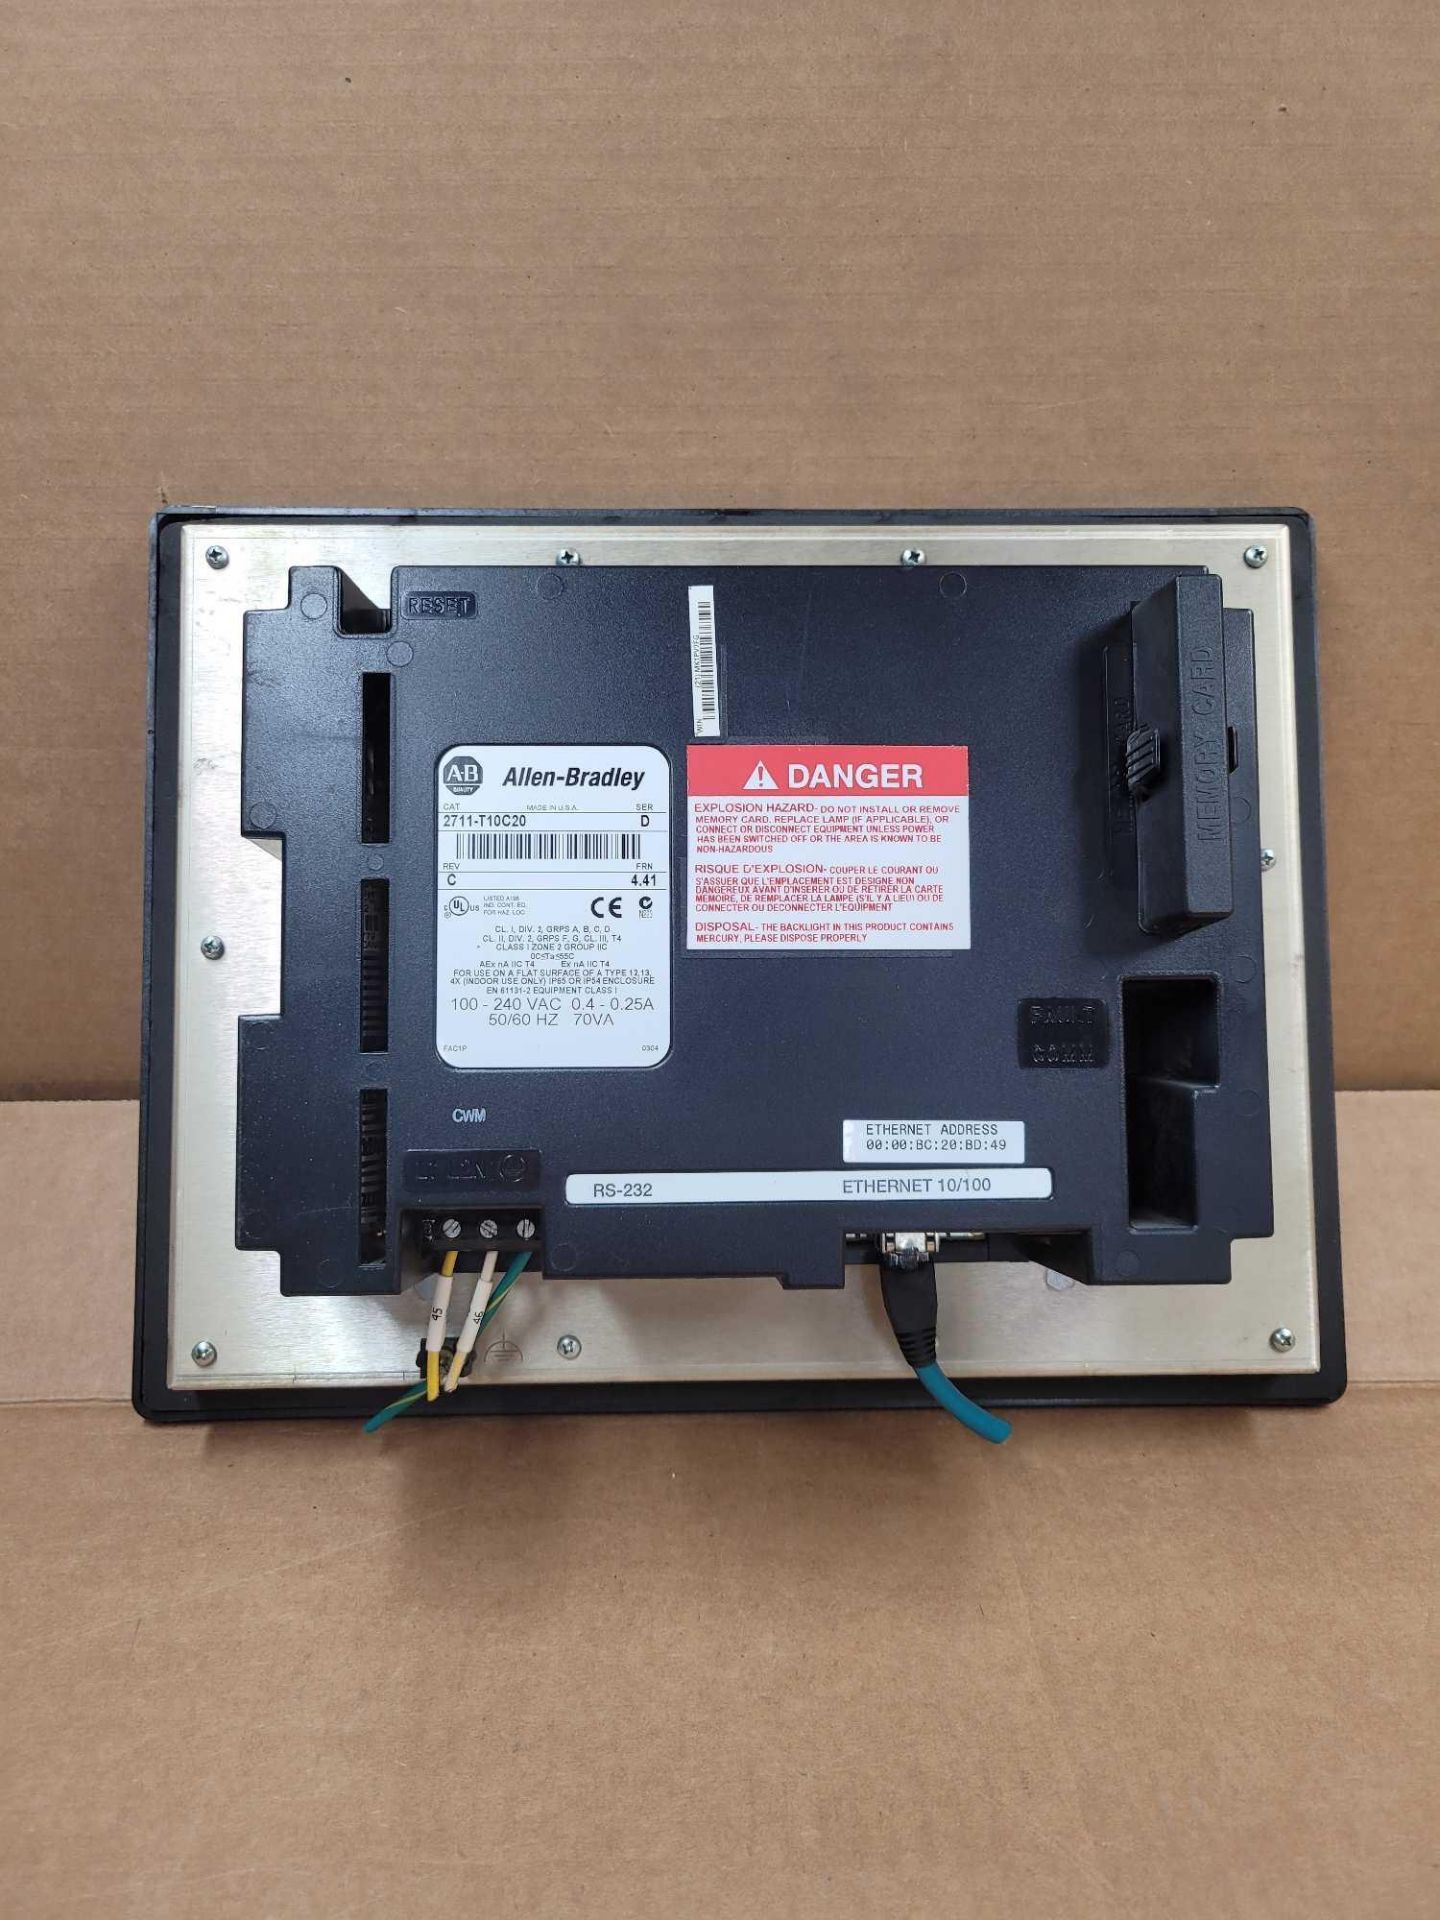 ALLEN BRADLEY 2711-T10C20 / PanelView 1000 Touch Screen Operator Interface  /  Lot Weight: 6.6 lbs - Image 2 of 6